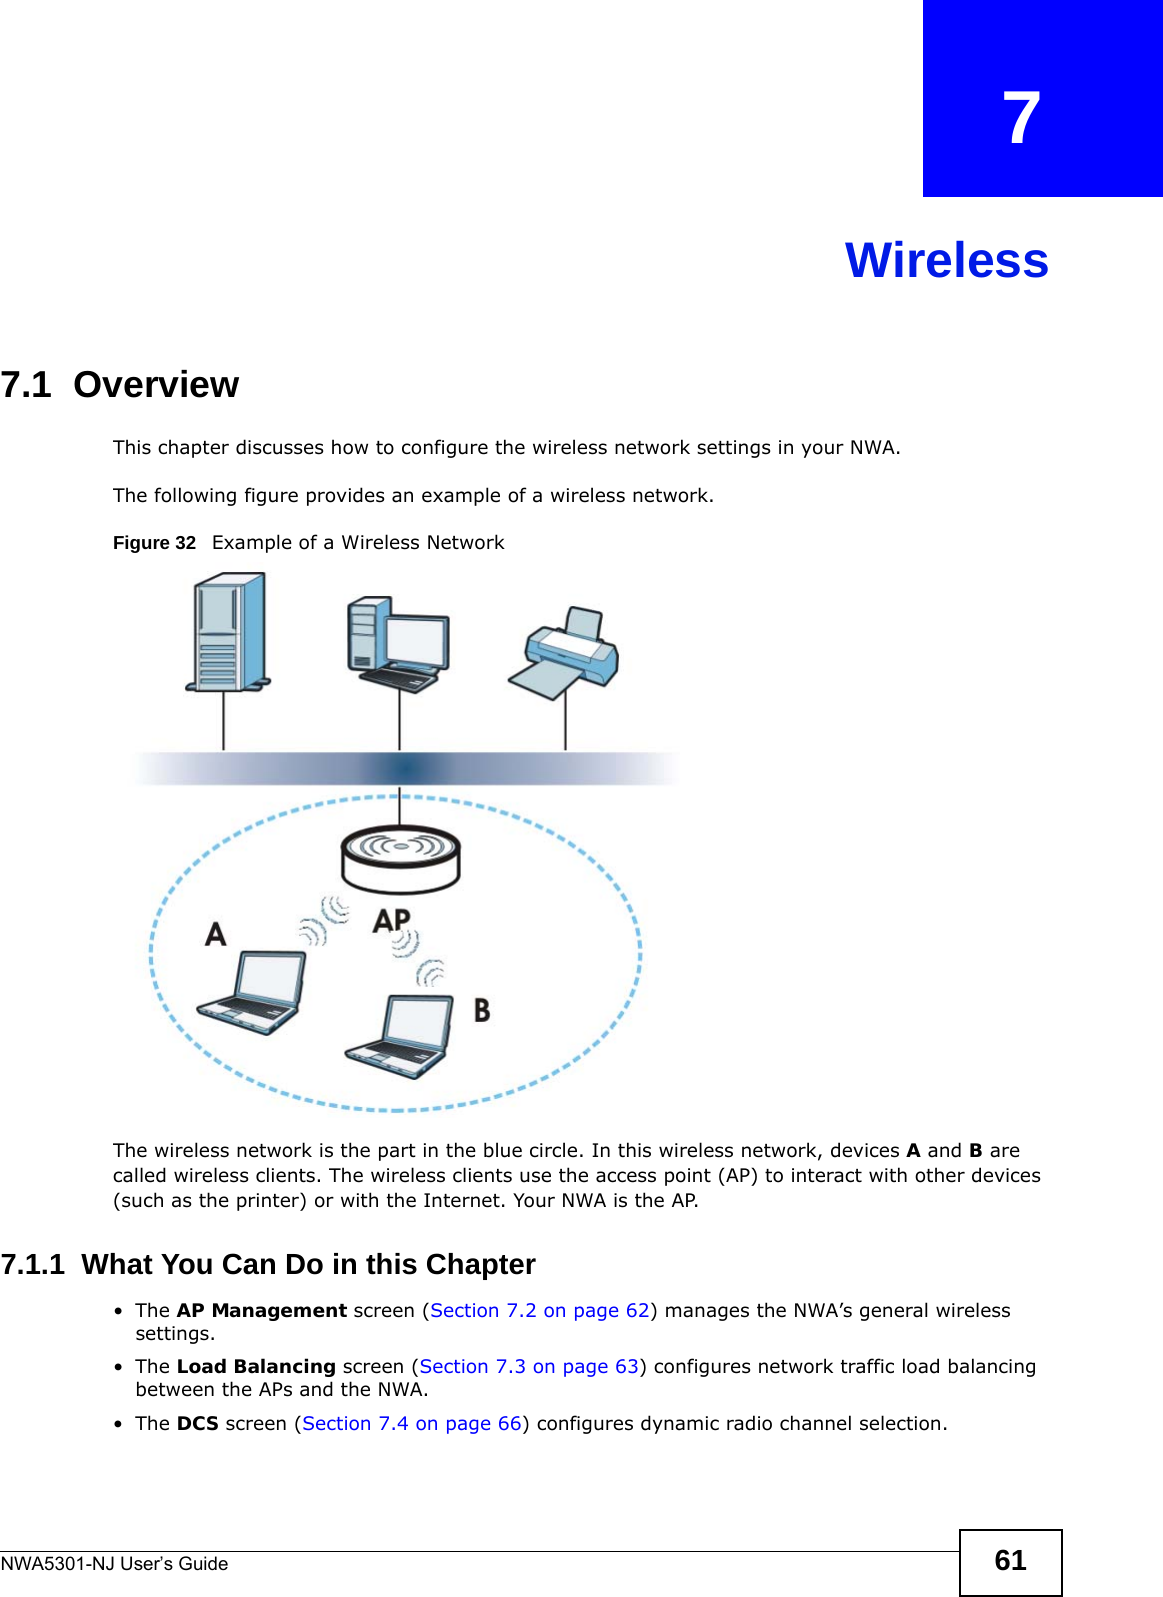 NWA5301-NJ User’s Guide 61CHAPTER   7Wireless7.1  OverviewThis chapter discusses how to configure the wireless network settings in your NWA. The following figure provides an example of a wireless network.Figure 32   Example of a Wireless NetworkThe wireless network is the part in the blue circle. In this wireless network, devices A and B are called wireless clients. The wireless clients use the access point (AP) to interact with other devices (such as the printer) or with the Internet. Your NWA is the AP.7.1.1  What You Can Do in this Chapter•The AP Management screen (Section 7.2 on page 62) manages the NWA’s general wireless settings.•The Load Balancing screen (Section 7.3 on page 63) configures network traffic load balancing between the APs and the NWA. •The DCS screen (Section 7.4 on page 66) configures dynamic radio channel selection.